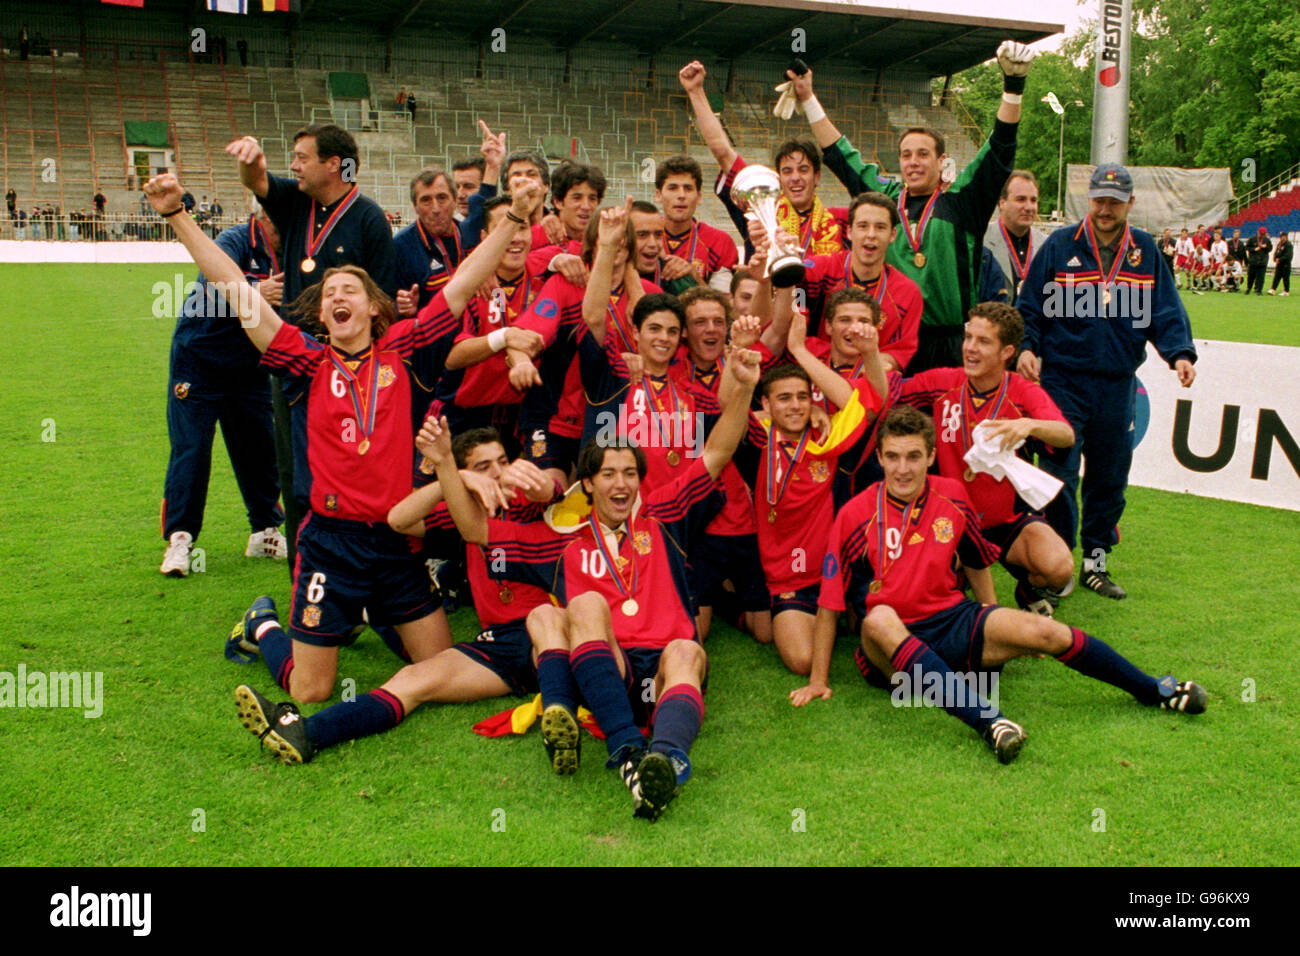 Soccer - European Under16 Championship - Final - Poland v Spain. The victorious Spanish team celebrate with the trophy after their 4-1 win over Poland Stock Photo